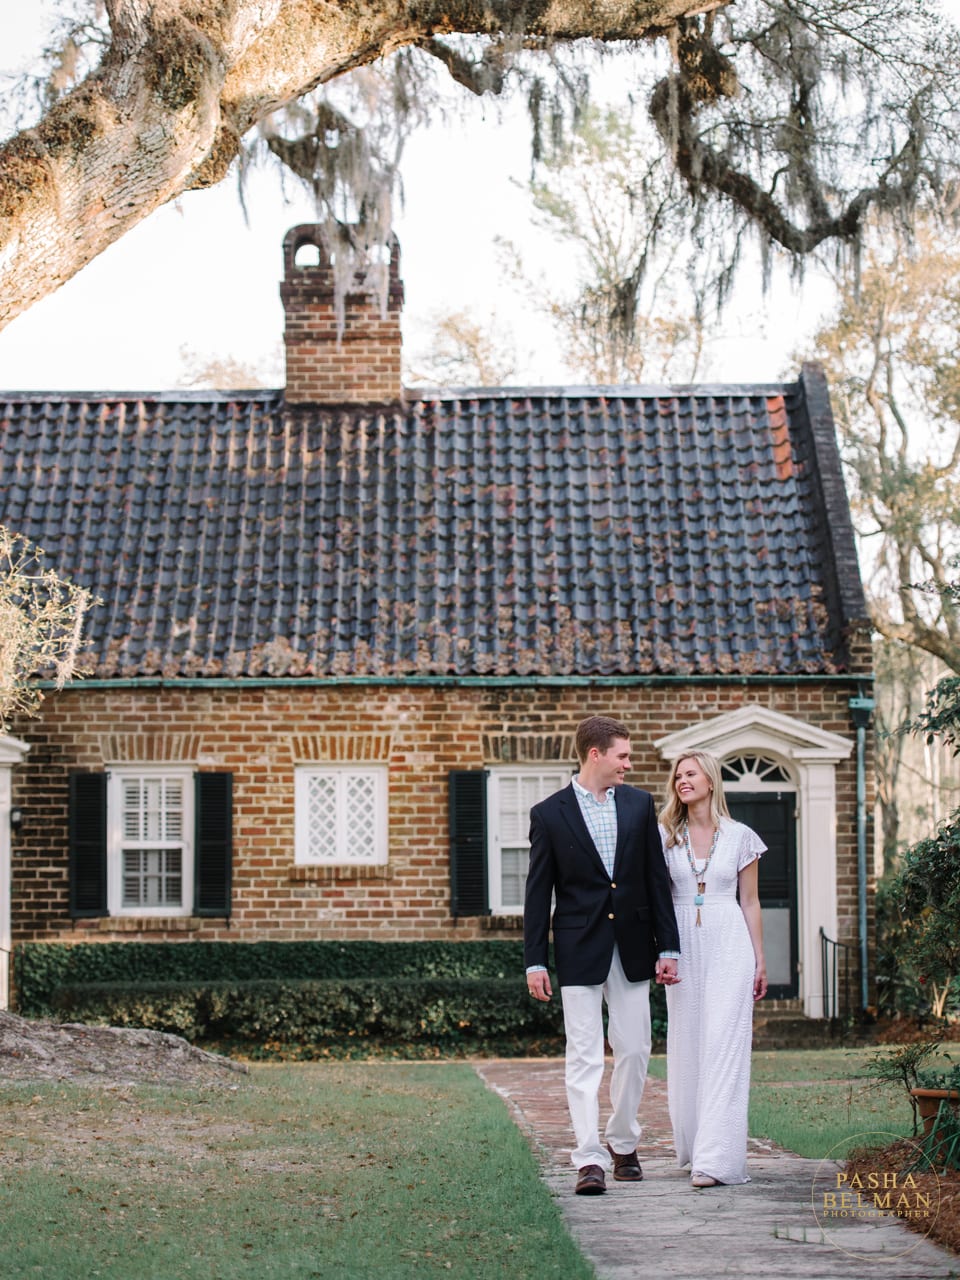 Engagement Photography | Engagement Pictures Charleston | Spanish Moss Myrtle Beach | Georgetown | South Carolina | Mansfield Plantation 